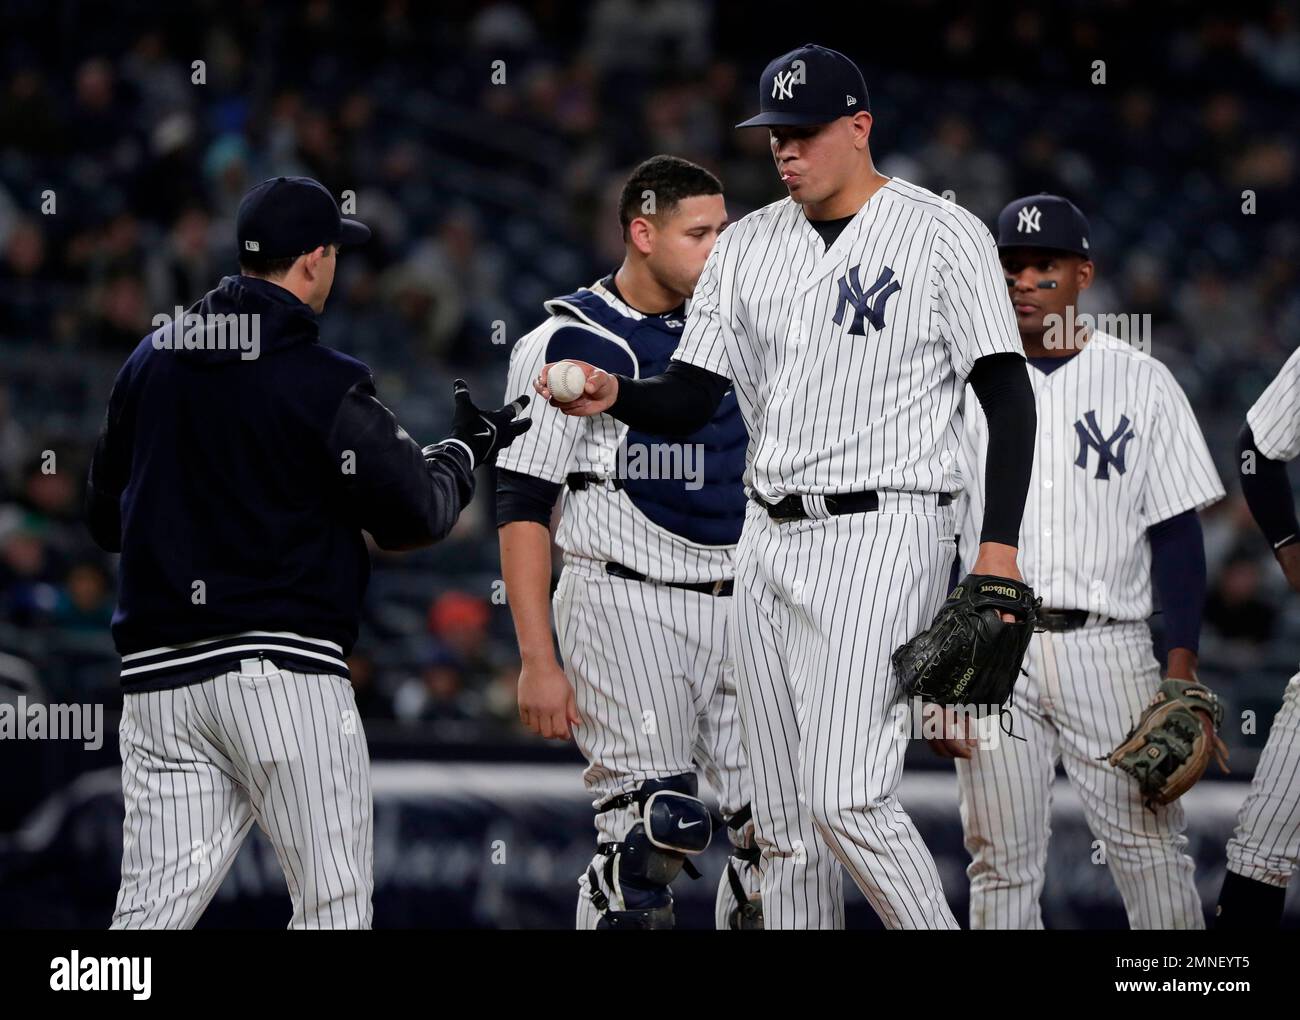 New York Yankees: Closing time is over for Dellin Betances